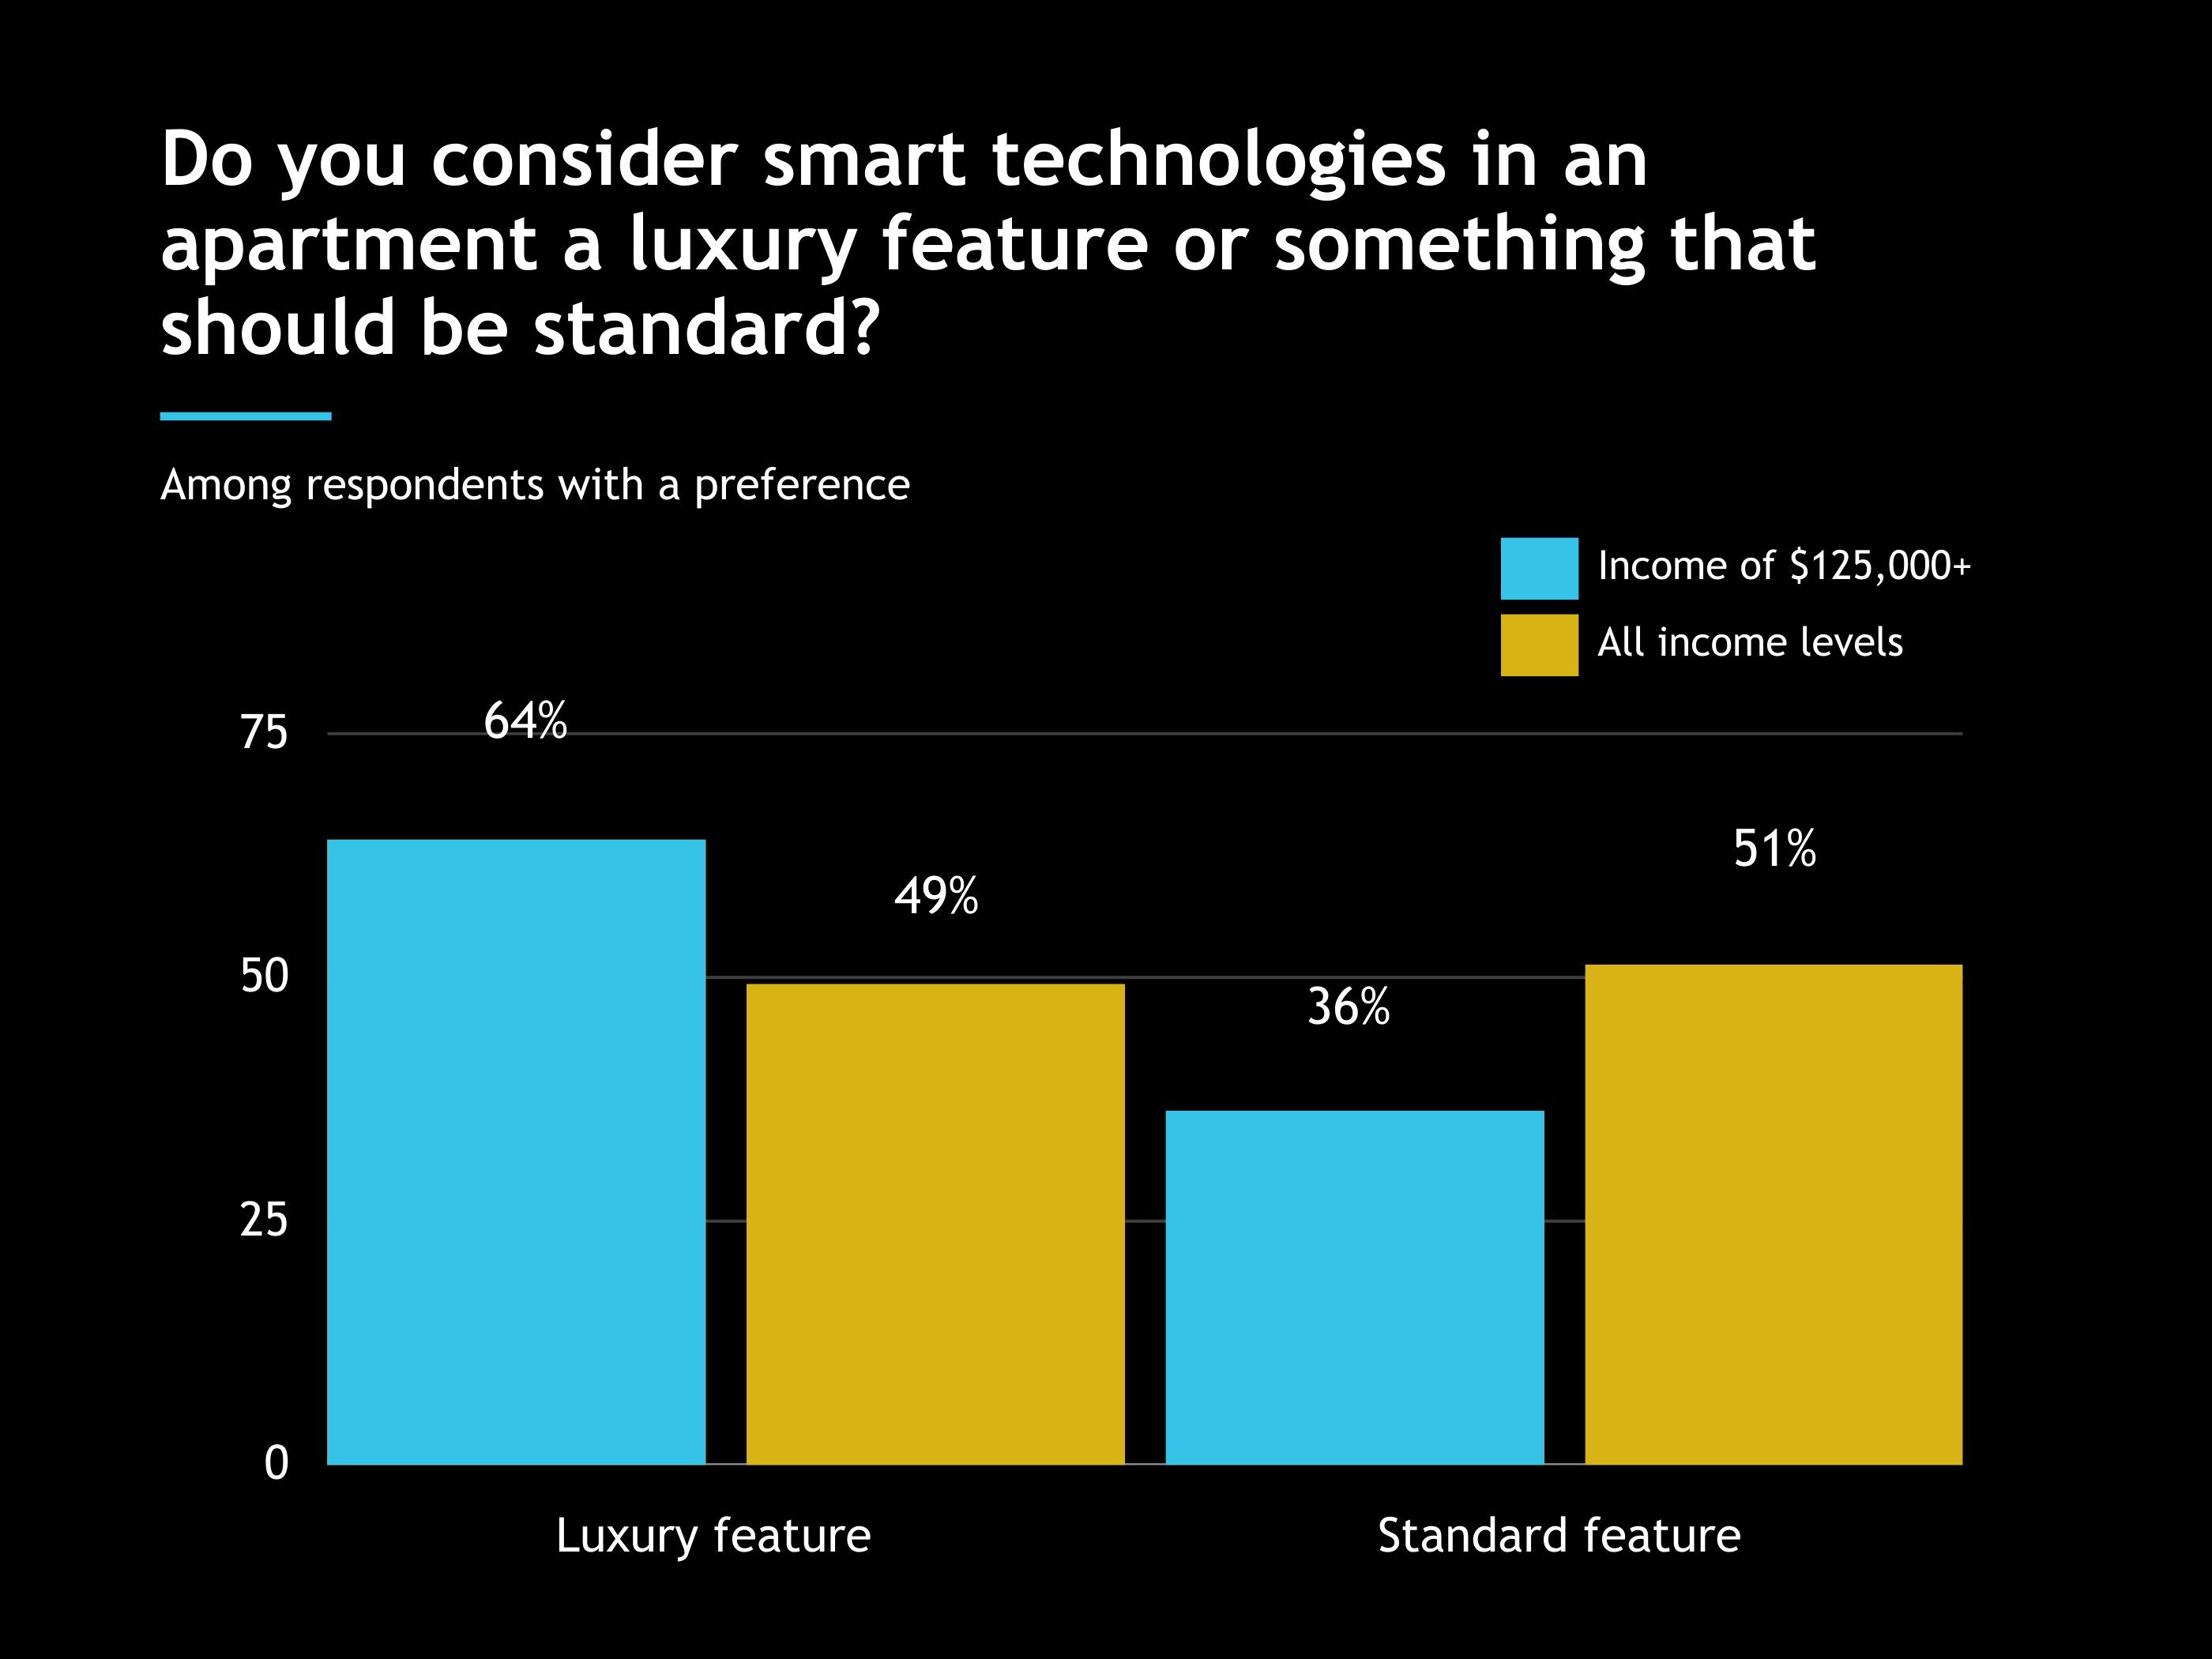 Do you consider smart technologies in an apartment a luxury feature or something that should be standard